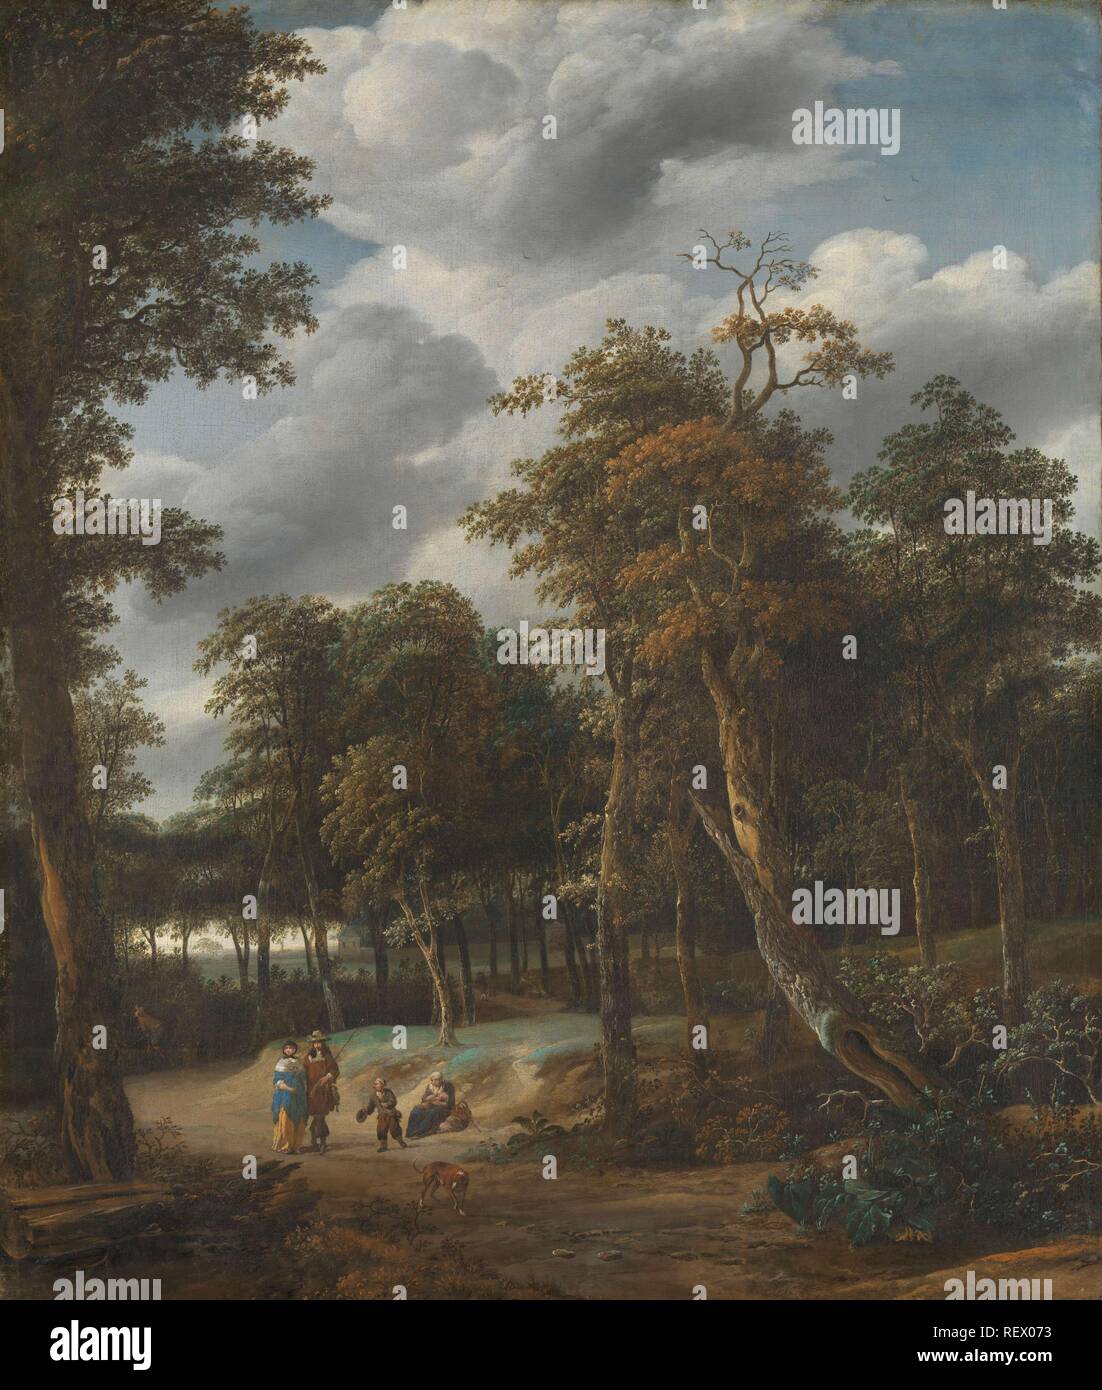 Forest Road. Dating: 1650 - 1674. Measurements: h 97 cm × w 82.4 cm; d 6.5 cm. Museum: Rijksmuseum, Amsterdam. Author: Jan Looten. Johannes Lingelbach (attributed to). Stock Photo